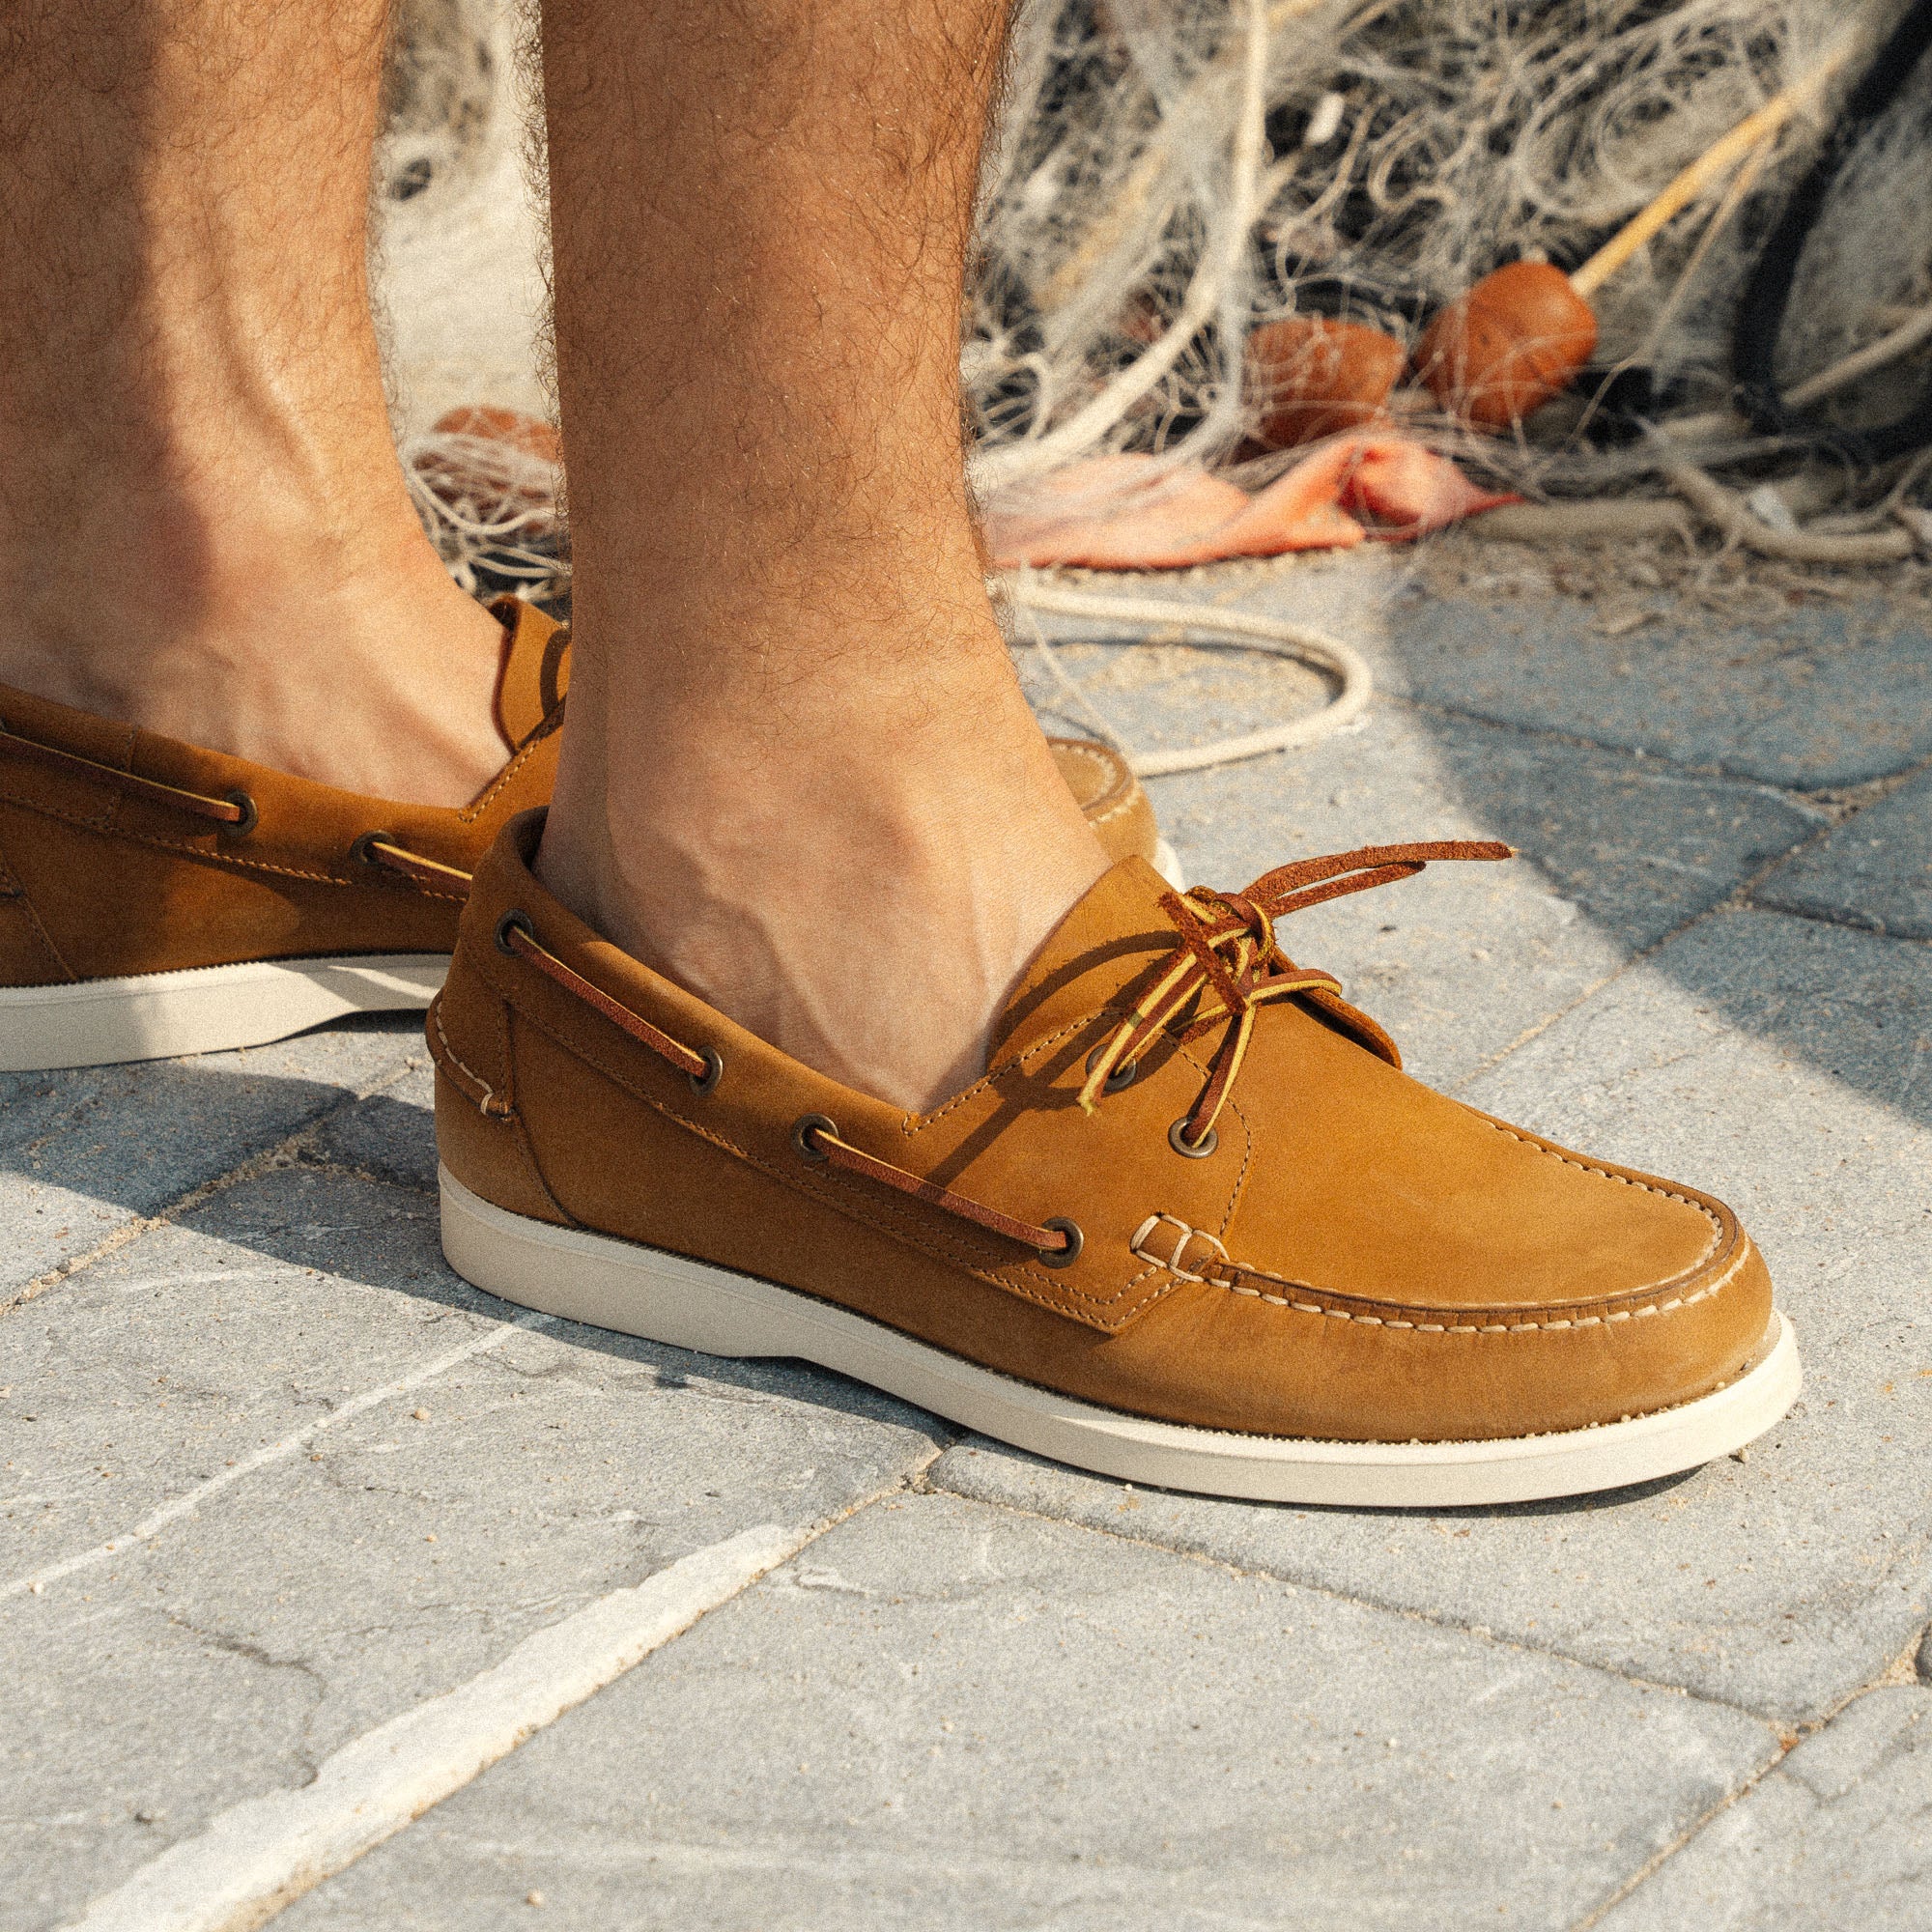 Boat Shoes Styling